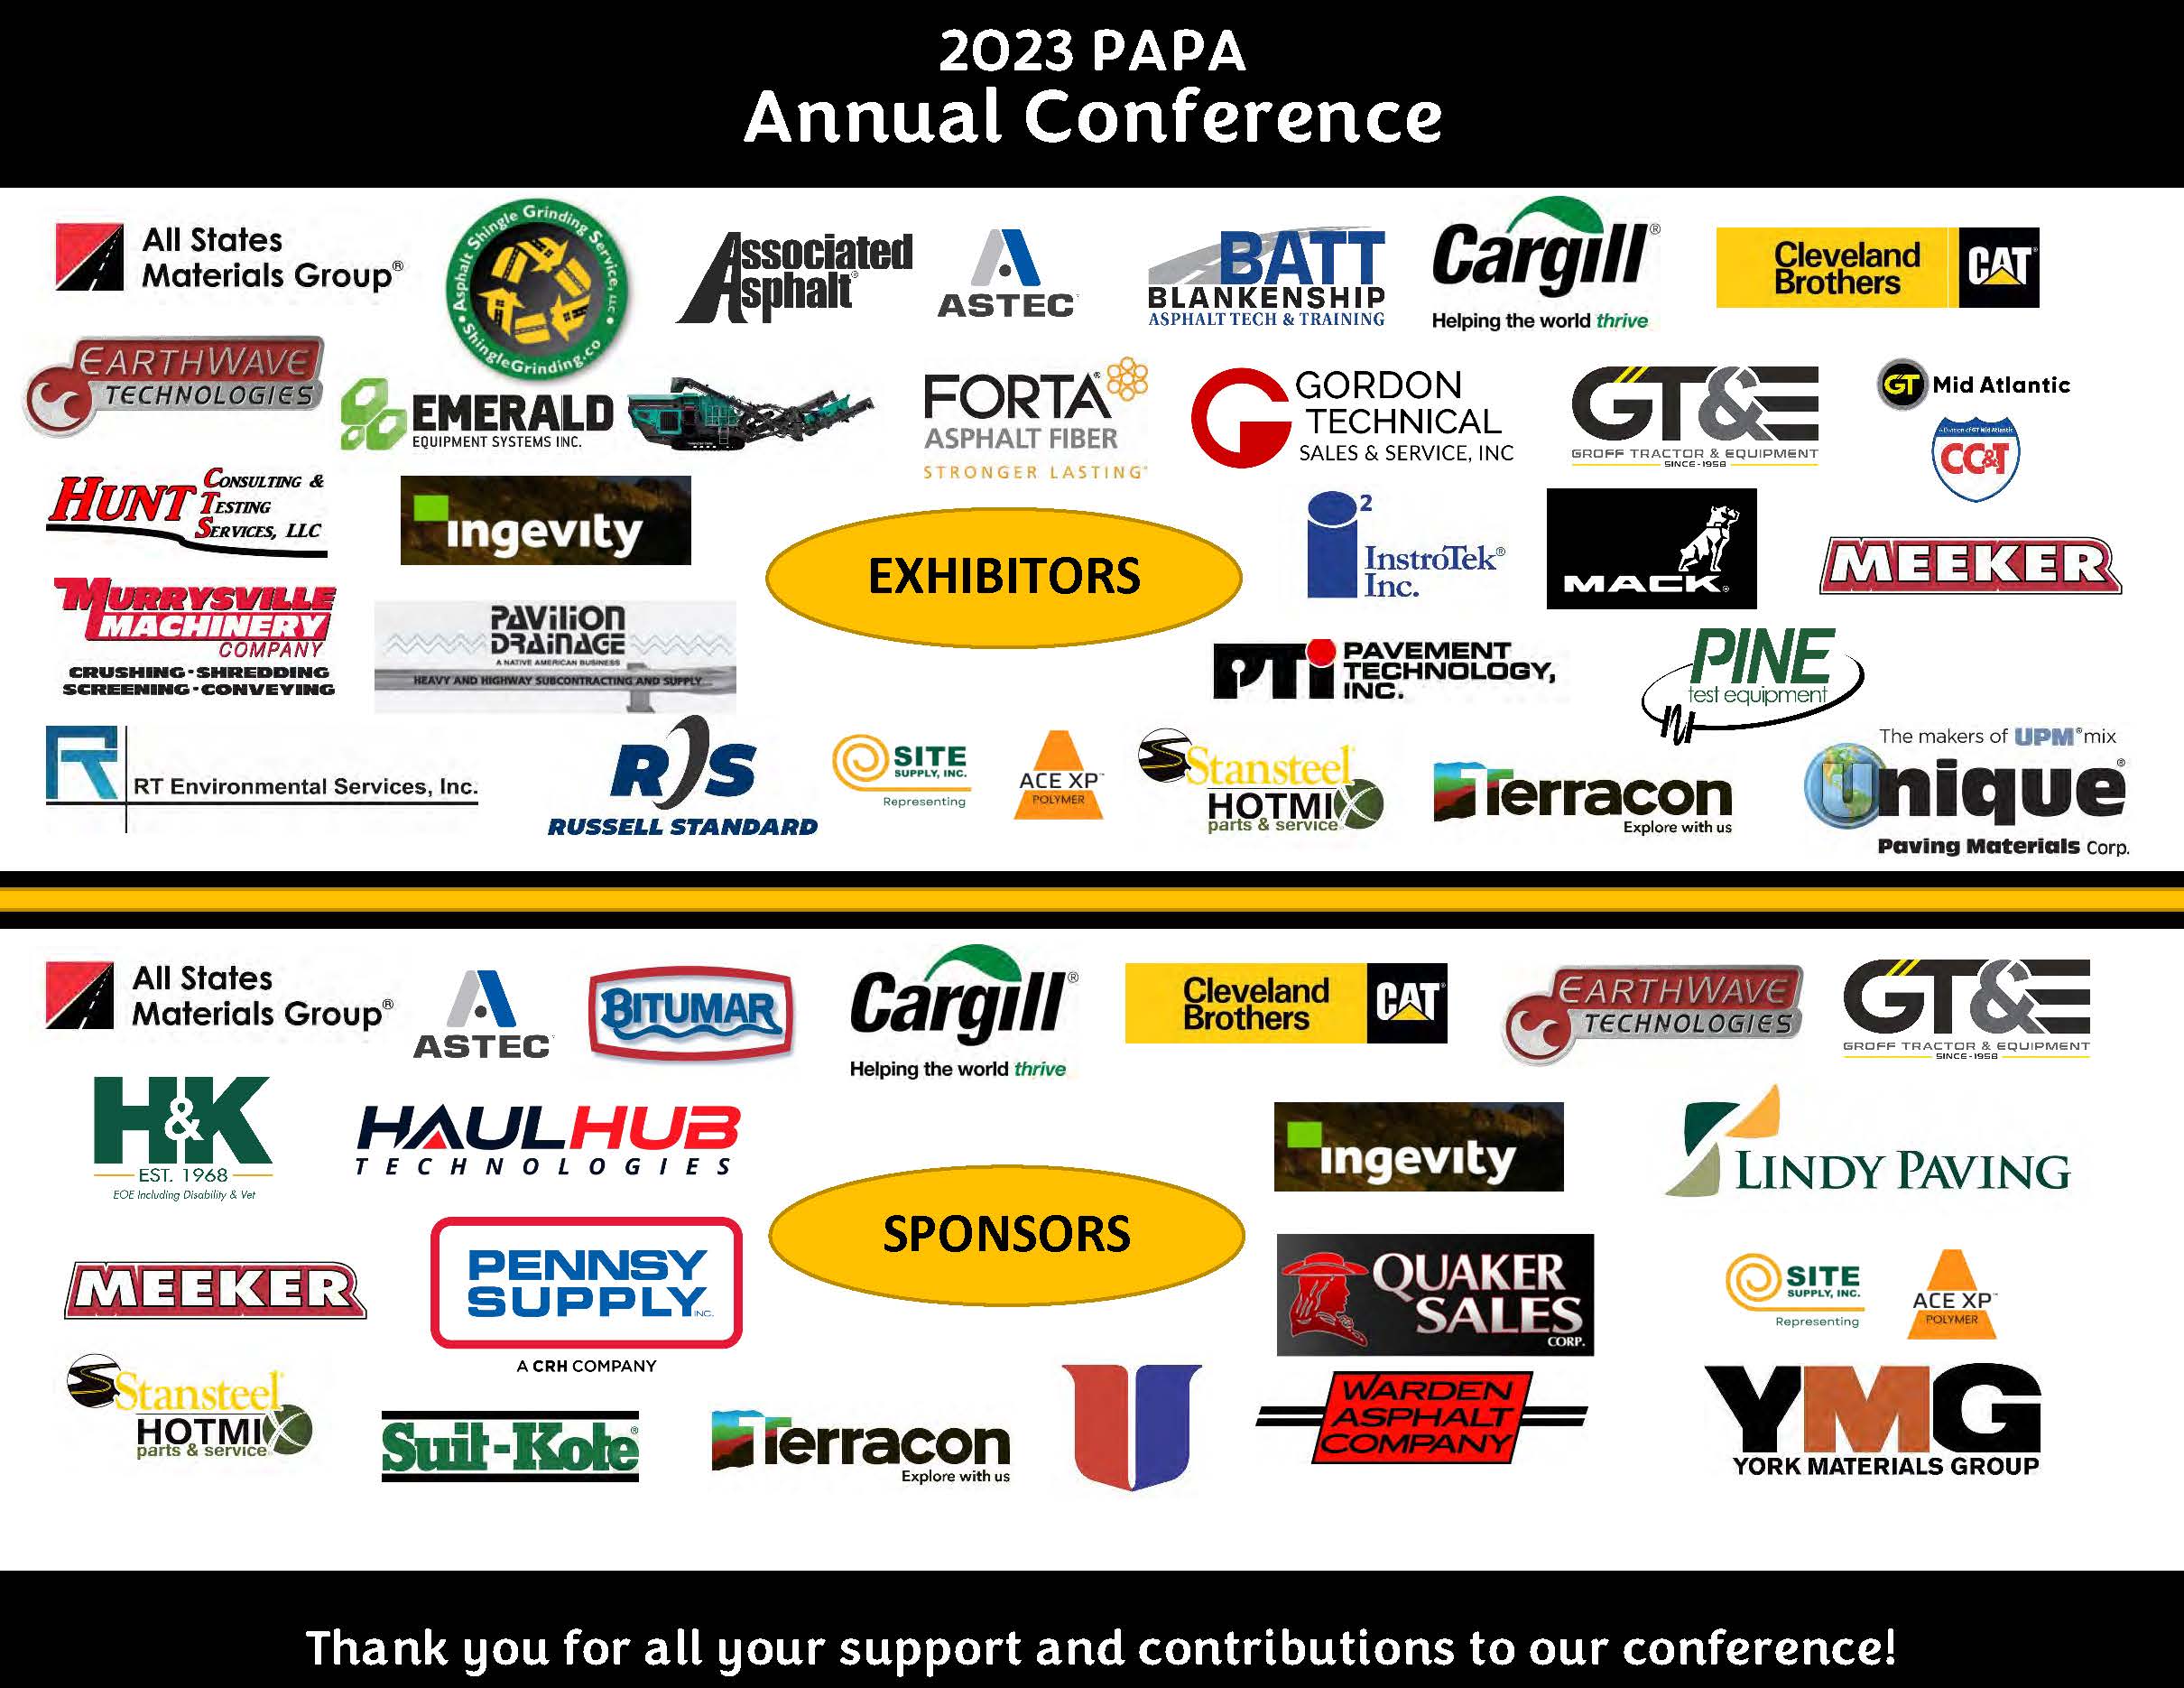 Thank you to our Exhibitors and Sponsors